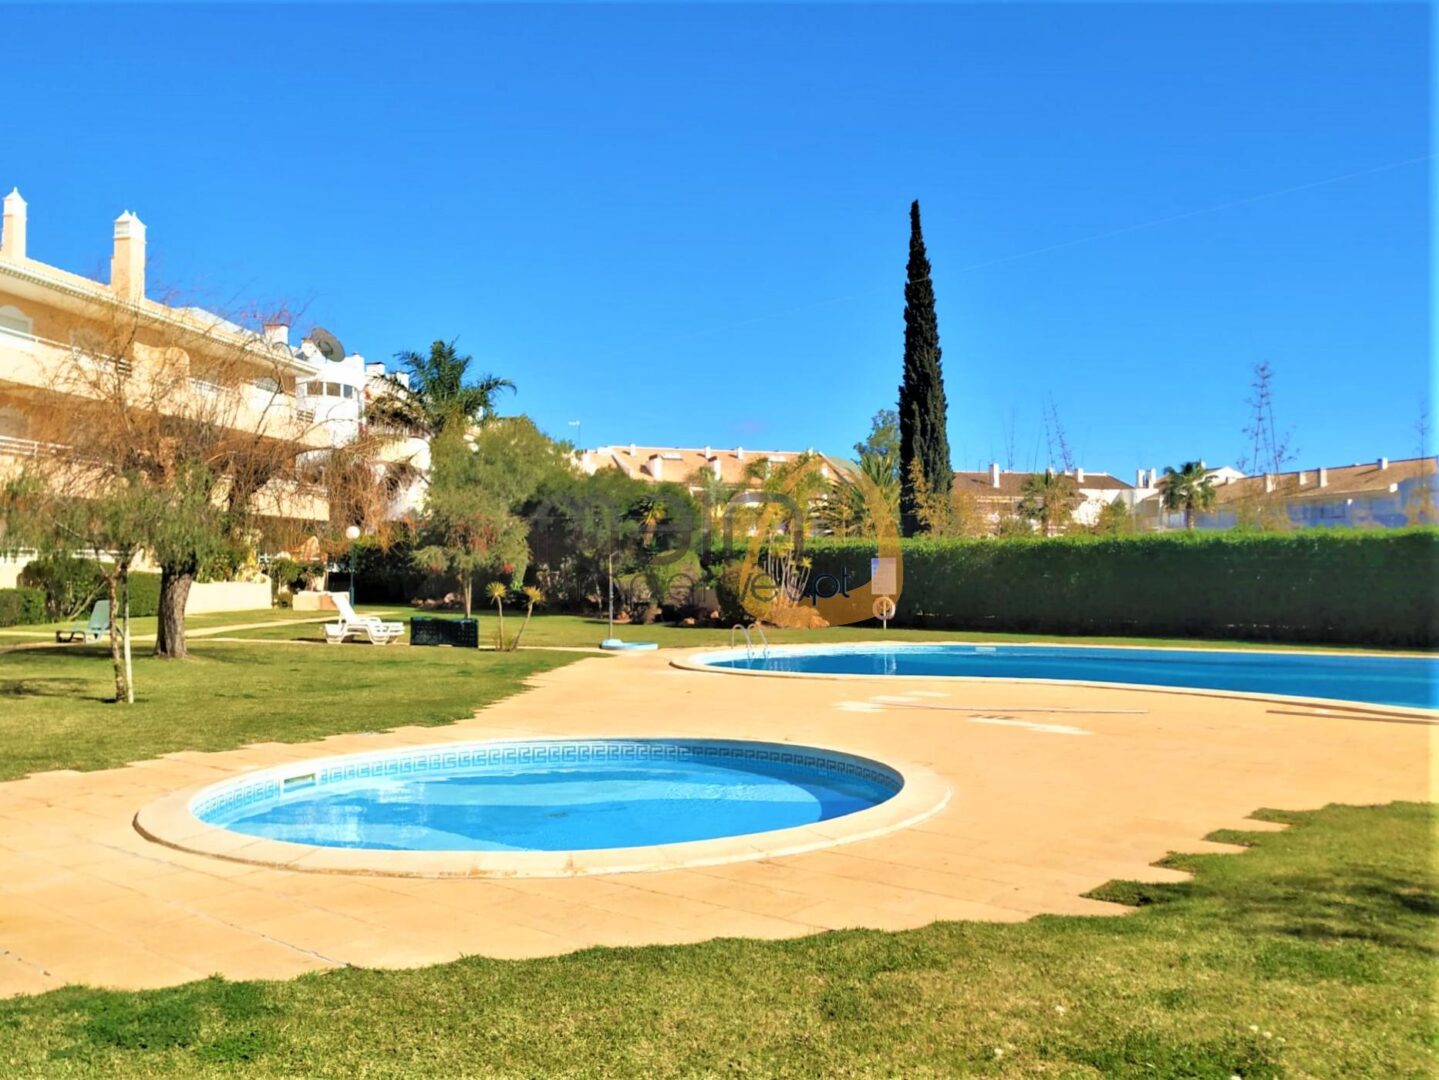 2 bedroom apartment in gated community with swimming pool near the center of Vilamoura